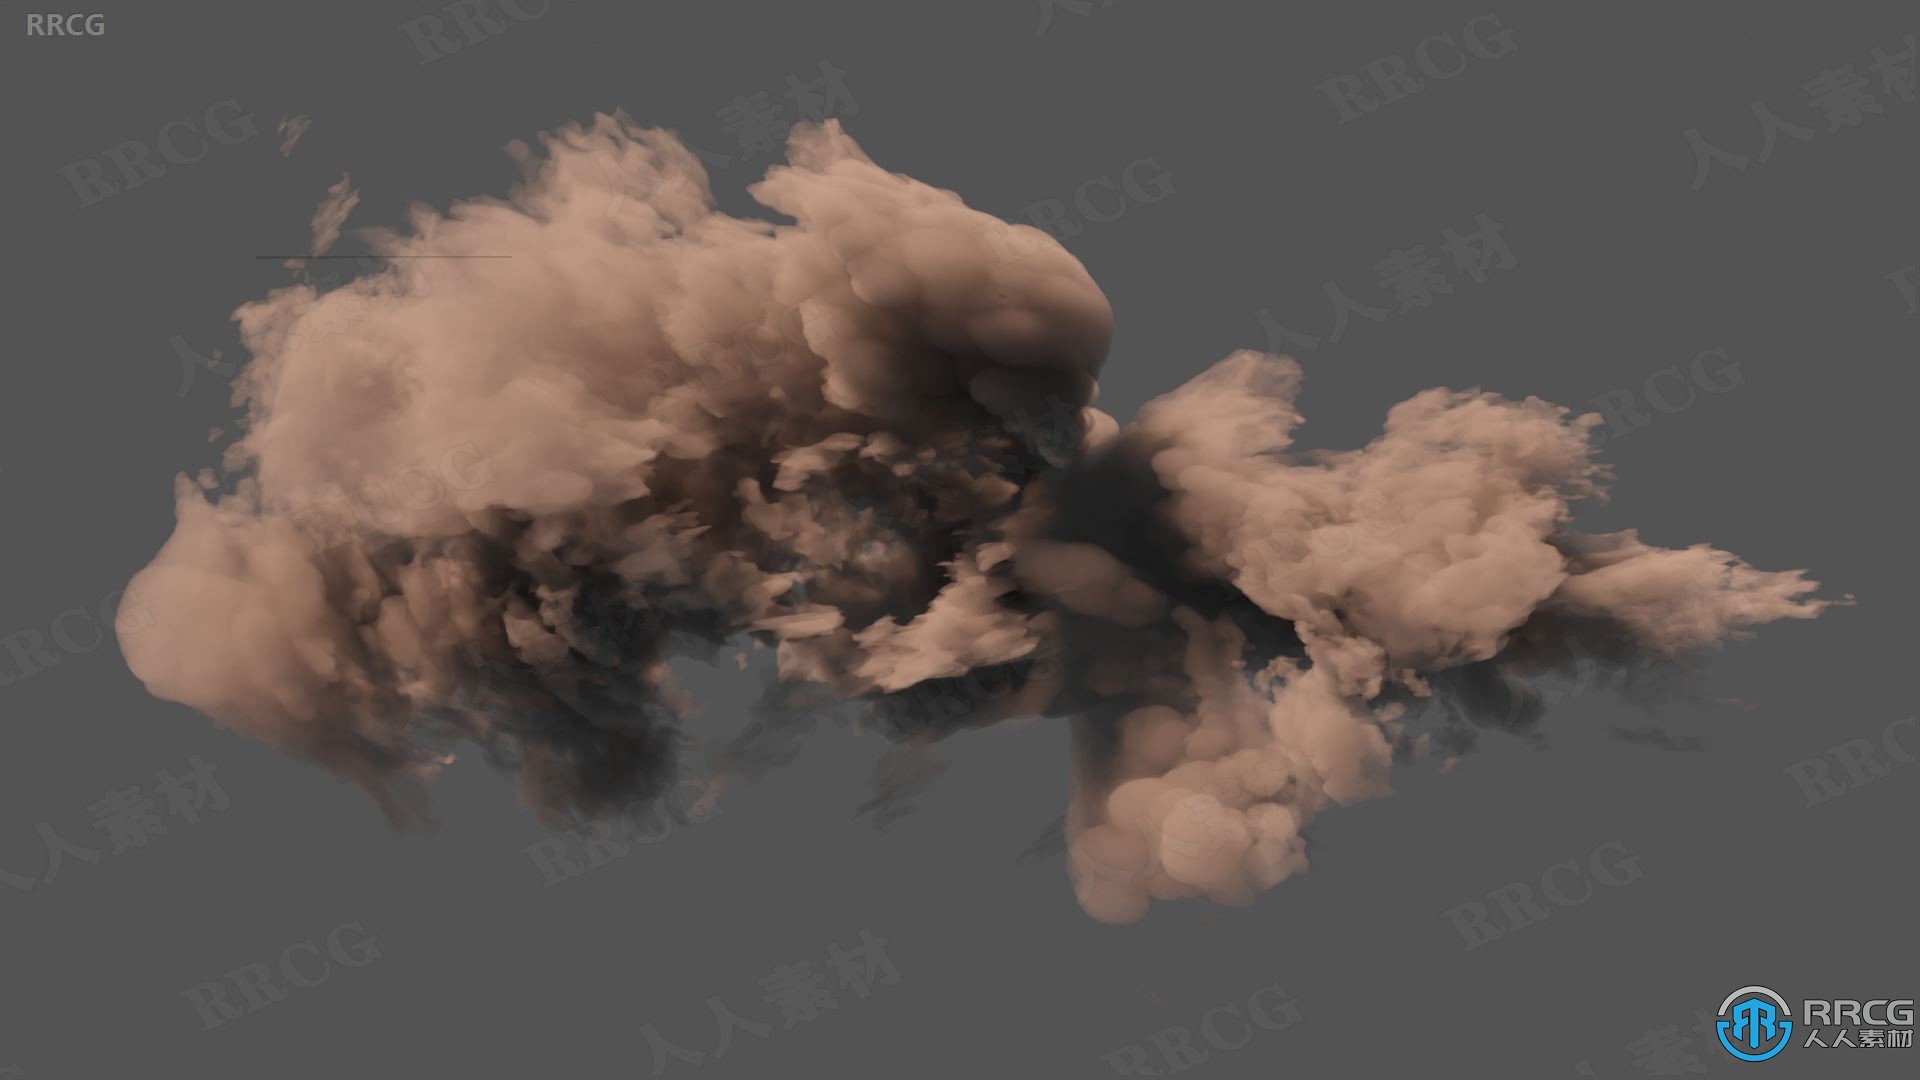 Aaa Clouds And Cloud Mixer云彩云朵生成Blender插件V0.1.0版